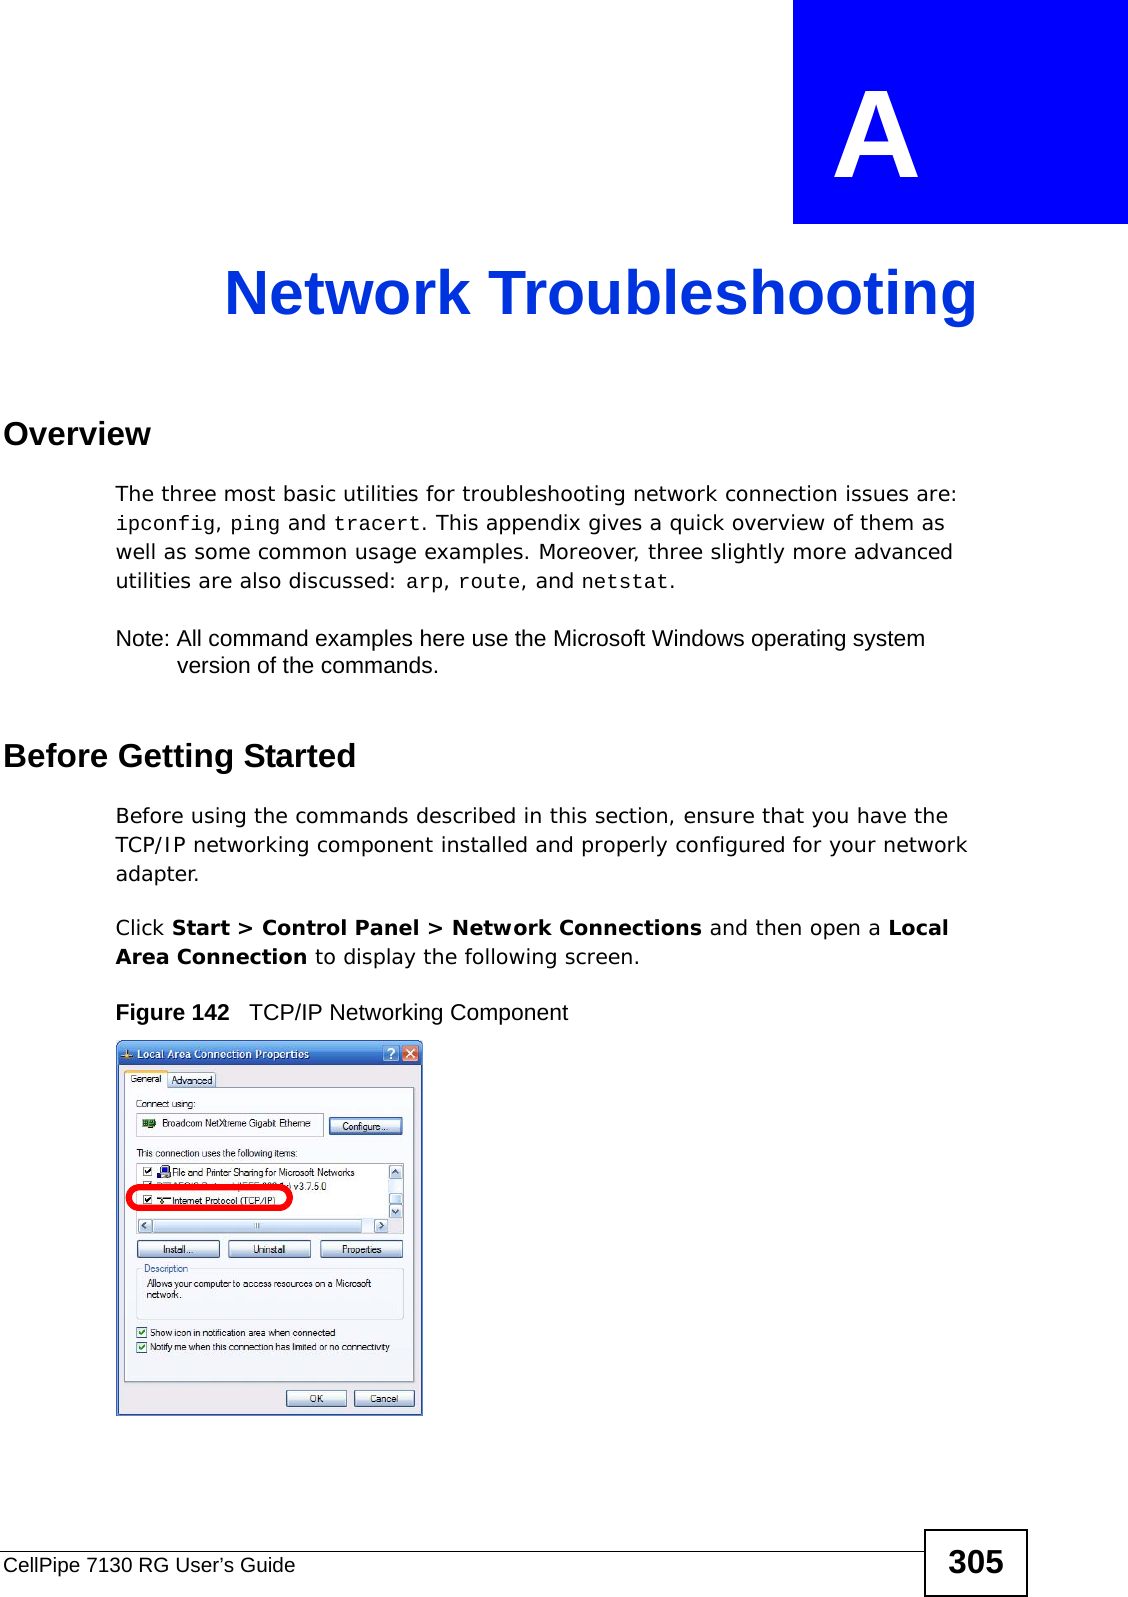 CellPipe 7130 RG User’s Guide 305APPENDIX  A Network TroubleshootingOverviewThe three most basic utilities for troubleshooting network connection issues are: ipconfig, ping and tracert. This appendix gives a quick overview of them as well as some common usage examples. Moreover, three slightly more advanced utilities are also discussed: arp, route, and netstat.Note: All command examples here use the Microsoft Windows operating system version of the commands.Before Getting StartedBefore using the commands described in this section, ensure that you have the TCP/IP networking component installed and properly configured for your network adapter.Click Start &gt; Control Panel &gt; Network Connections and then open a Local Area Connection to display the following screen. Figure 142   TCP/IP Networking Component